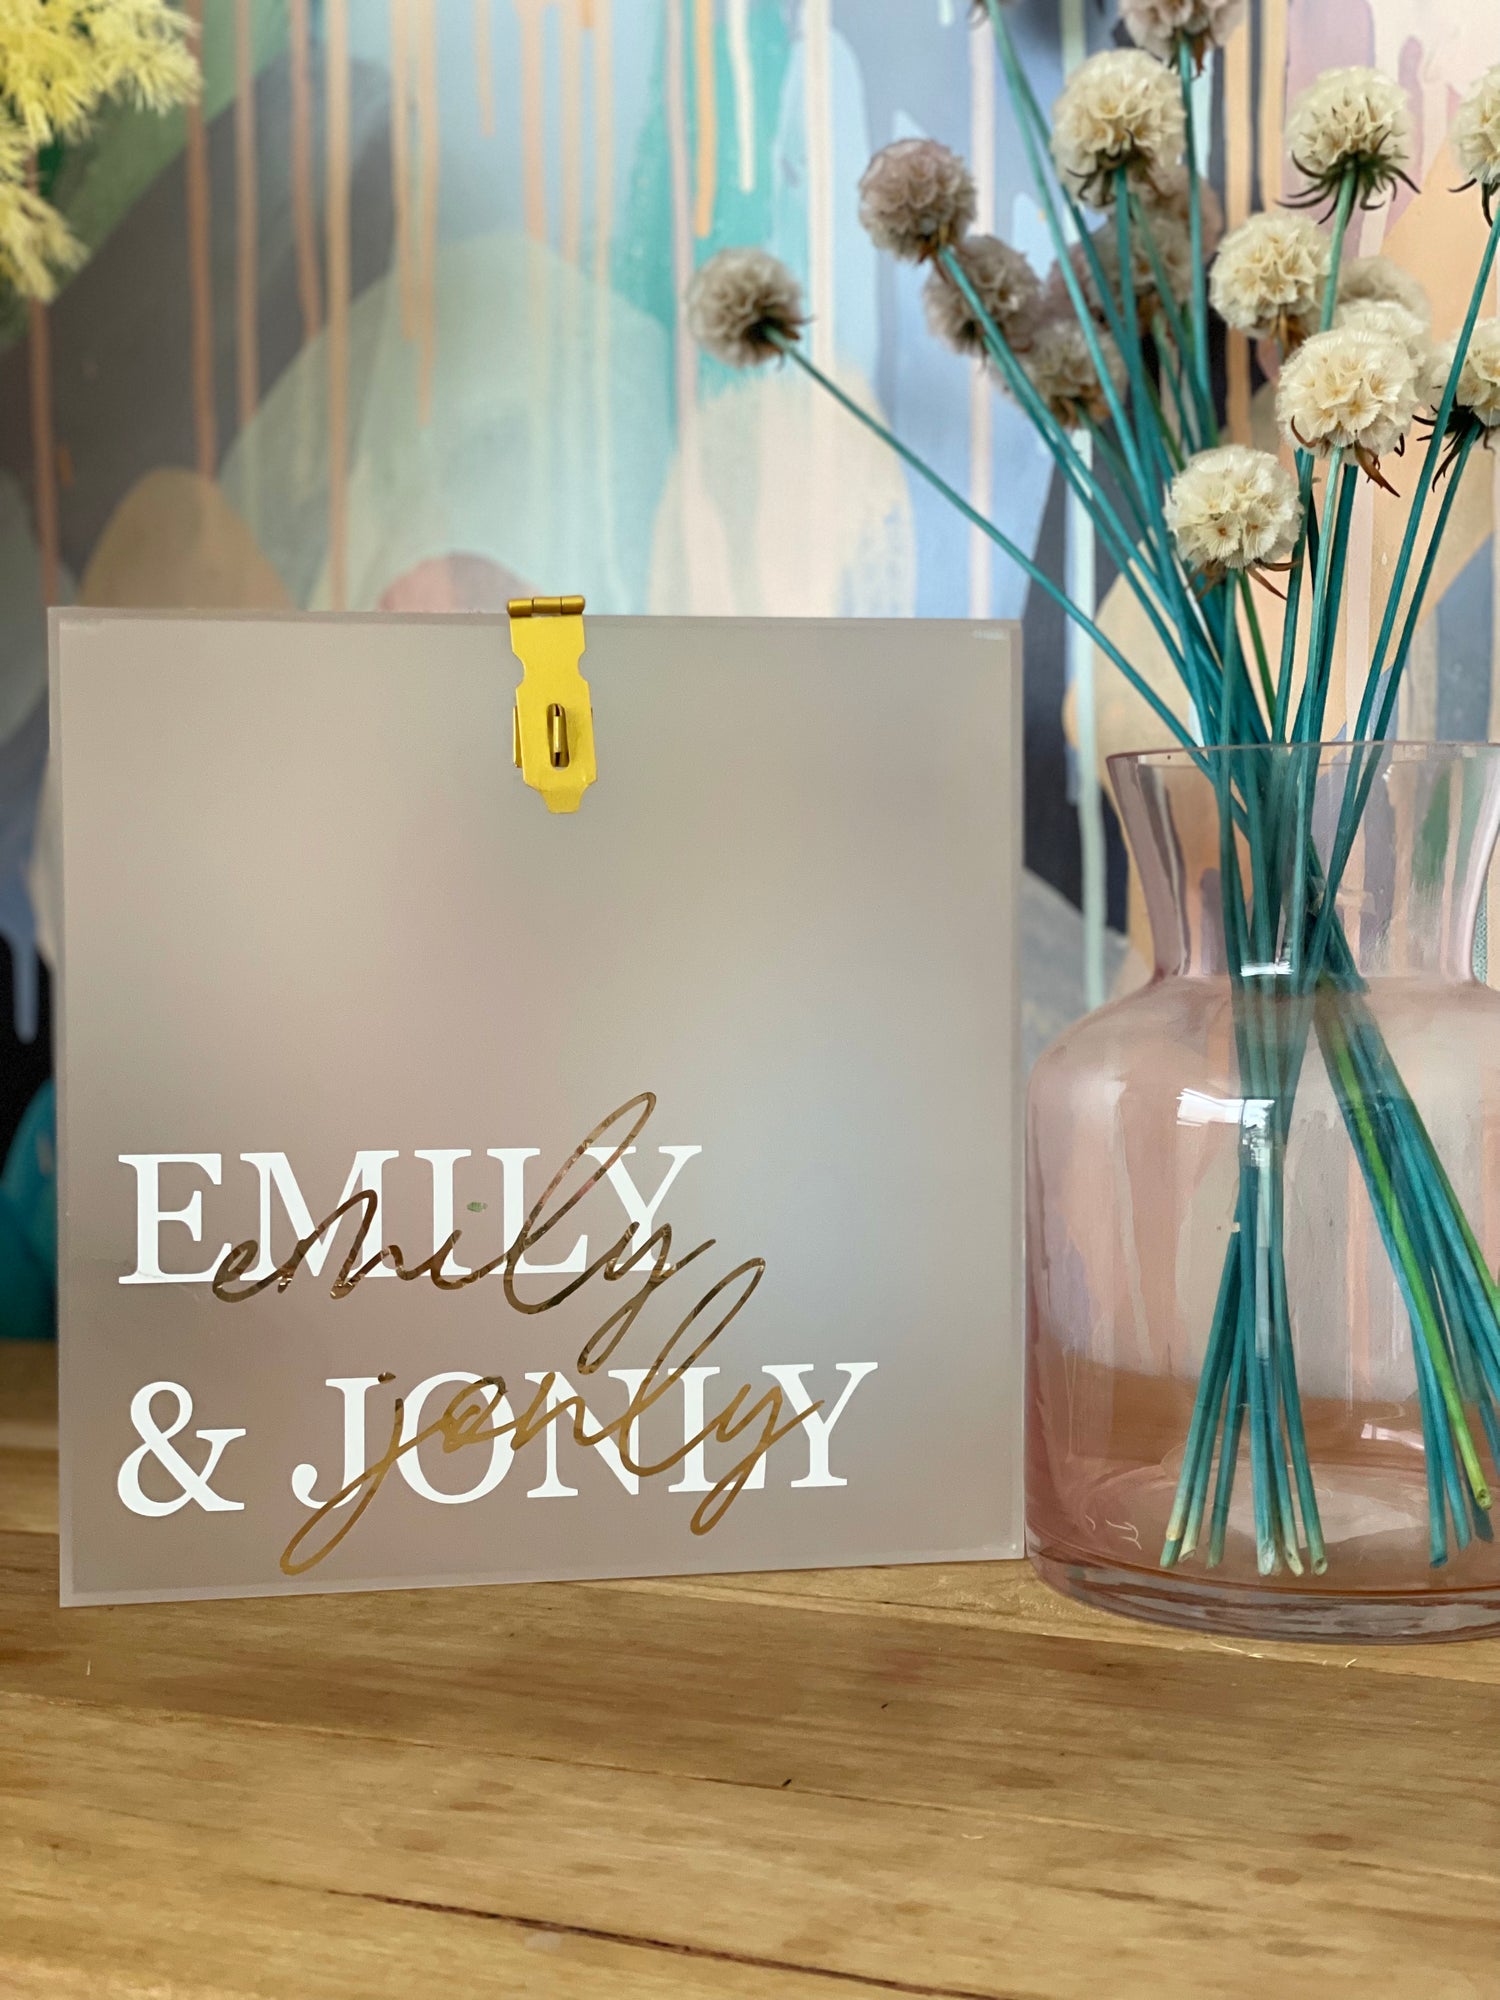 This Frosted Acrylic Wishing Well is the perfect addition to your wedding decor. With its timeless style, your guests will be sure to notice this beautiful and elegant addition to your special day. The acrylic material adds a modern feel to a timeless classic, providing you with a unique and stylish way to style your wedding.